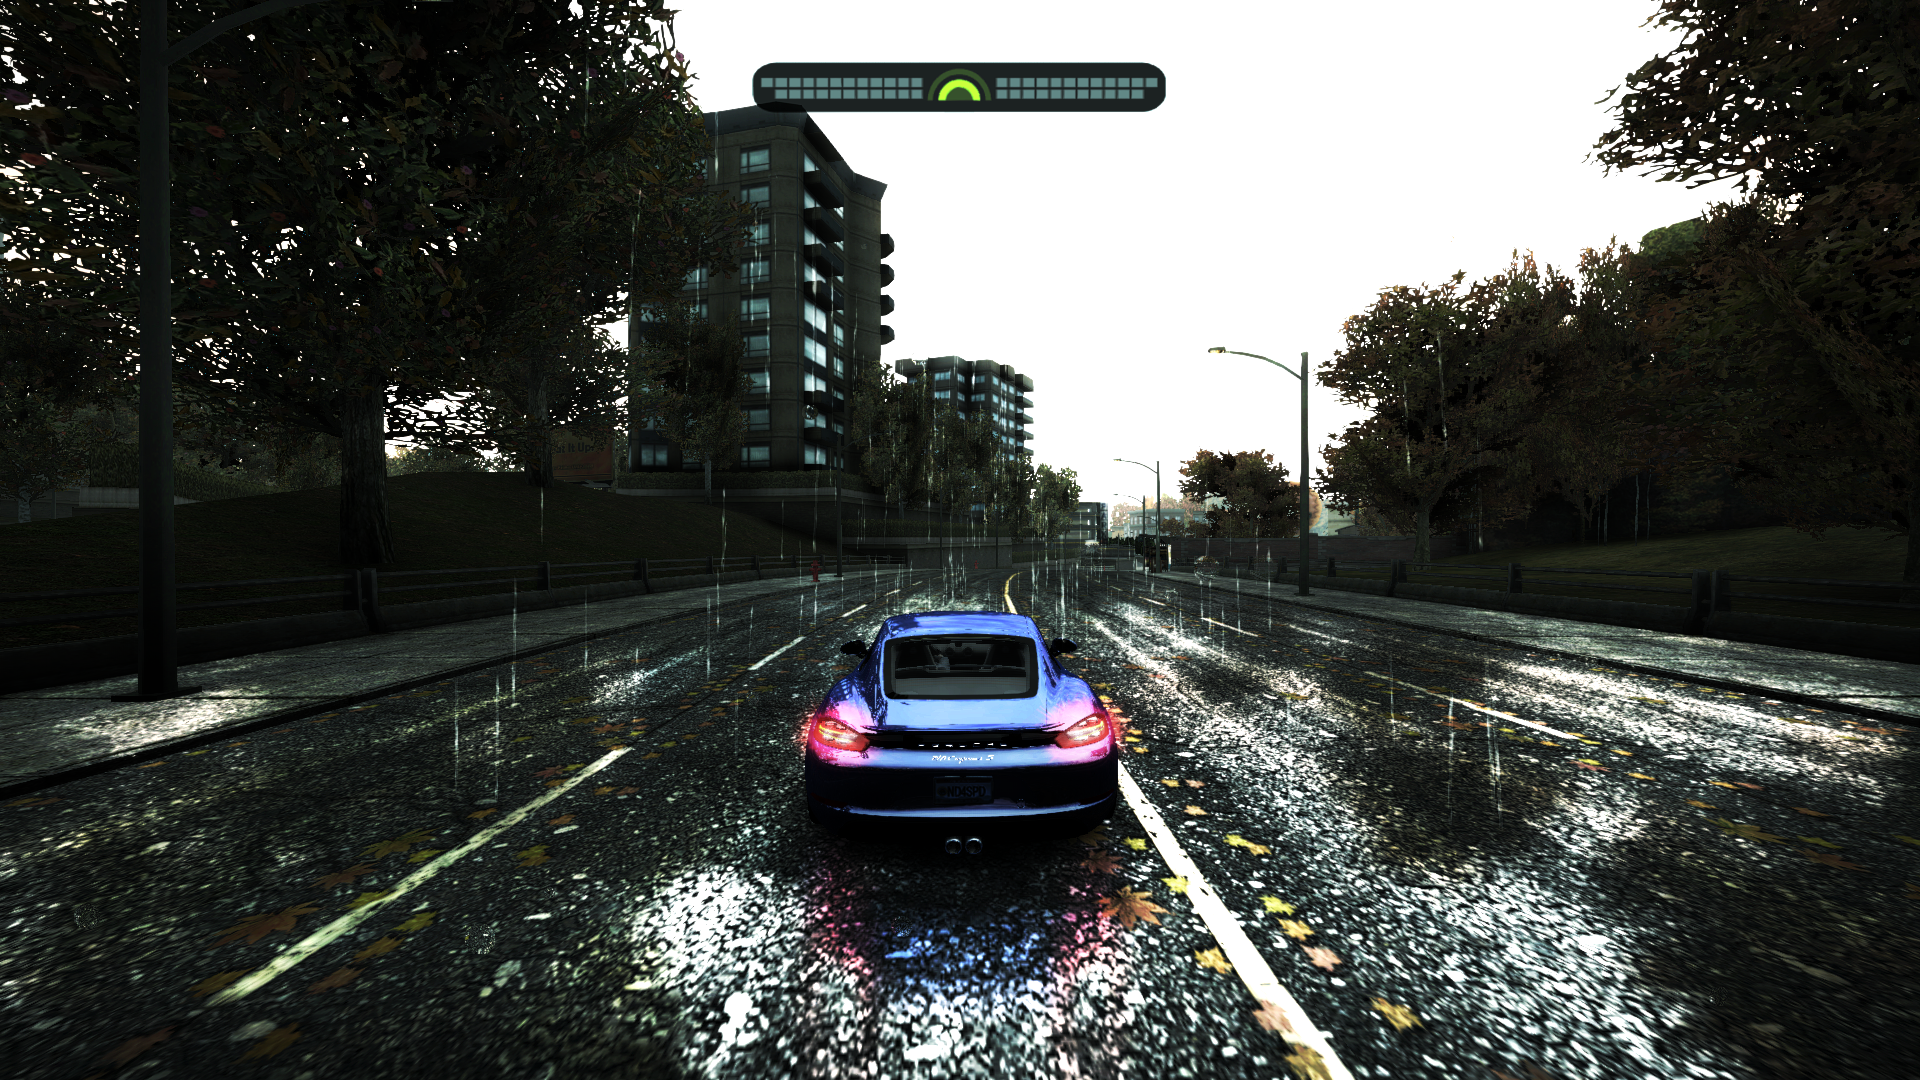 need for speed unbound release date download